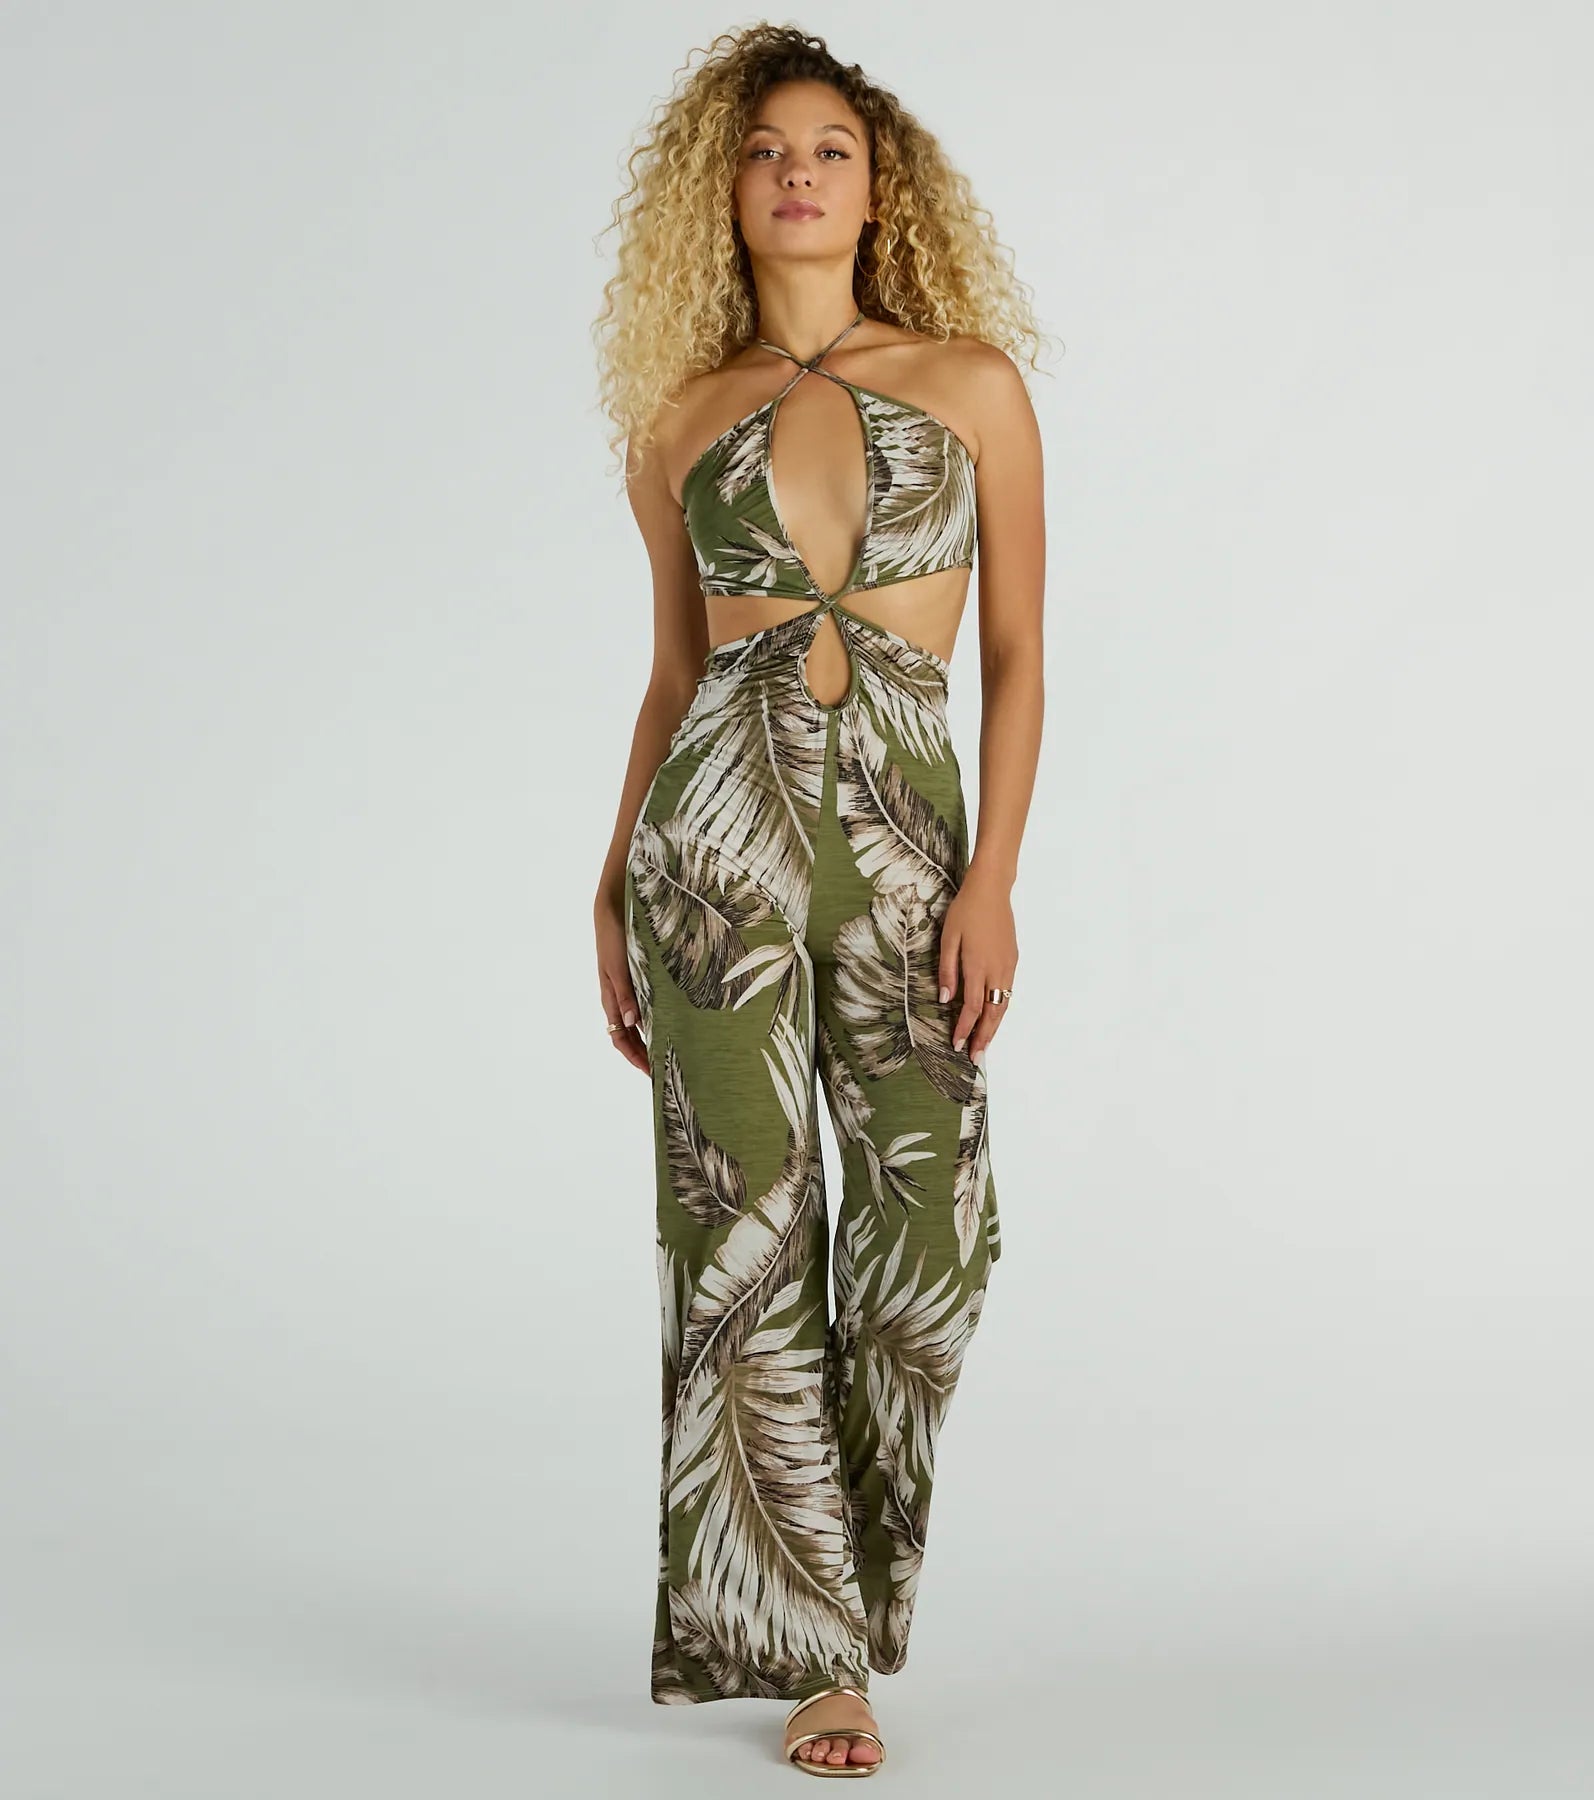 Sexy Halter Plunging Neck Sleeveless Spaghetti Strap Knit Stretchy Cutout Open-Back Tropical Print Jumpsuit